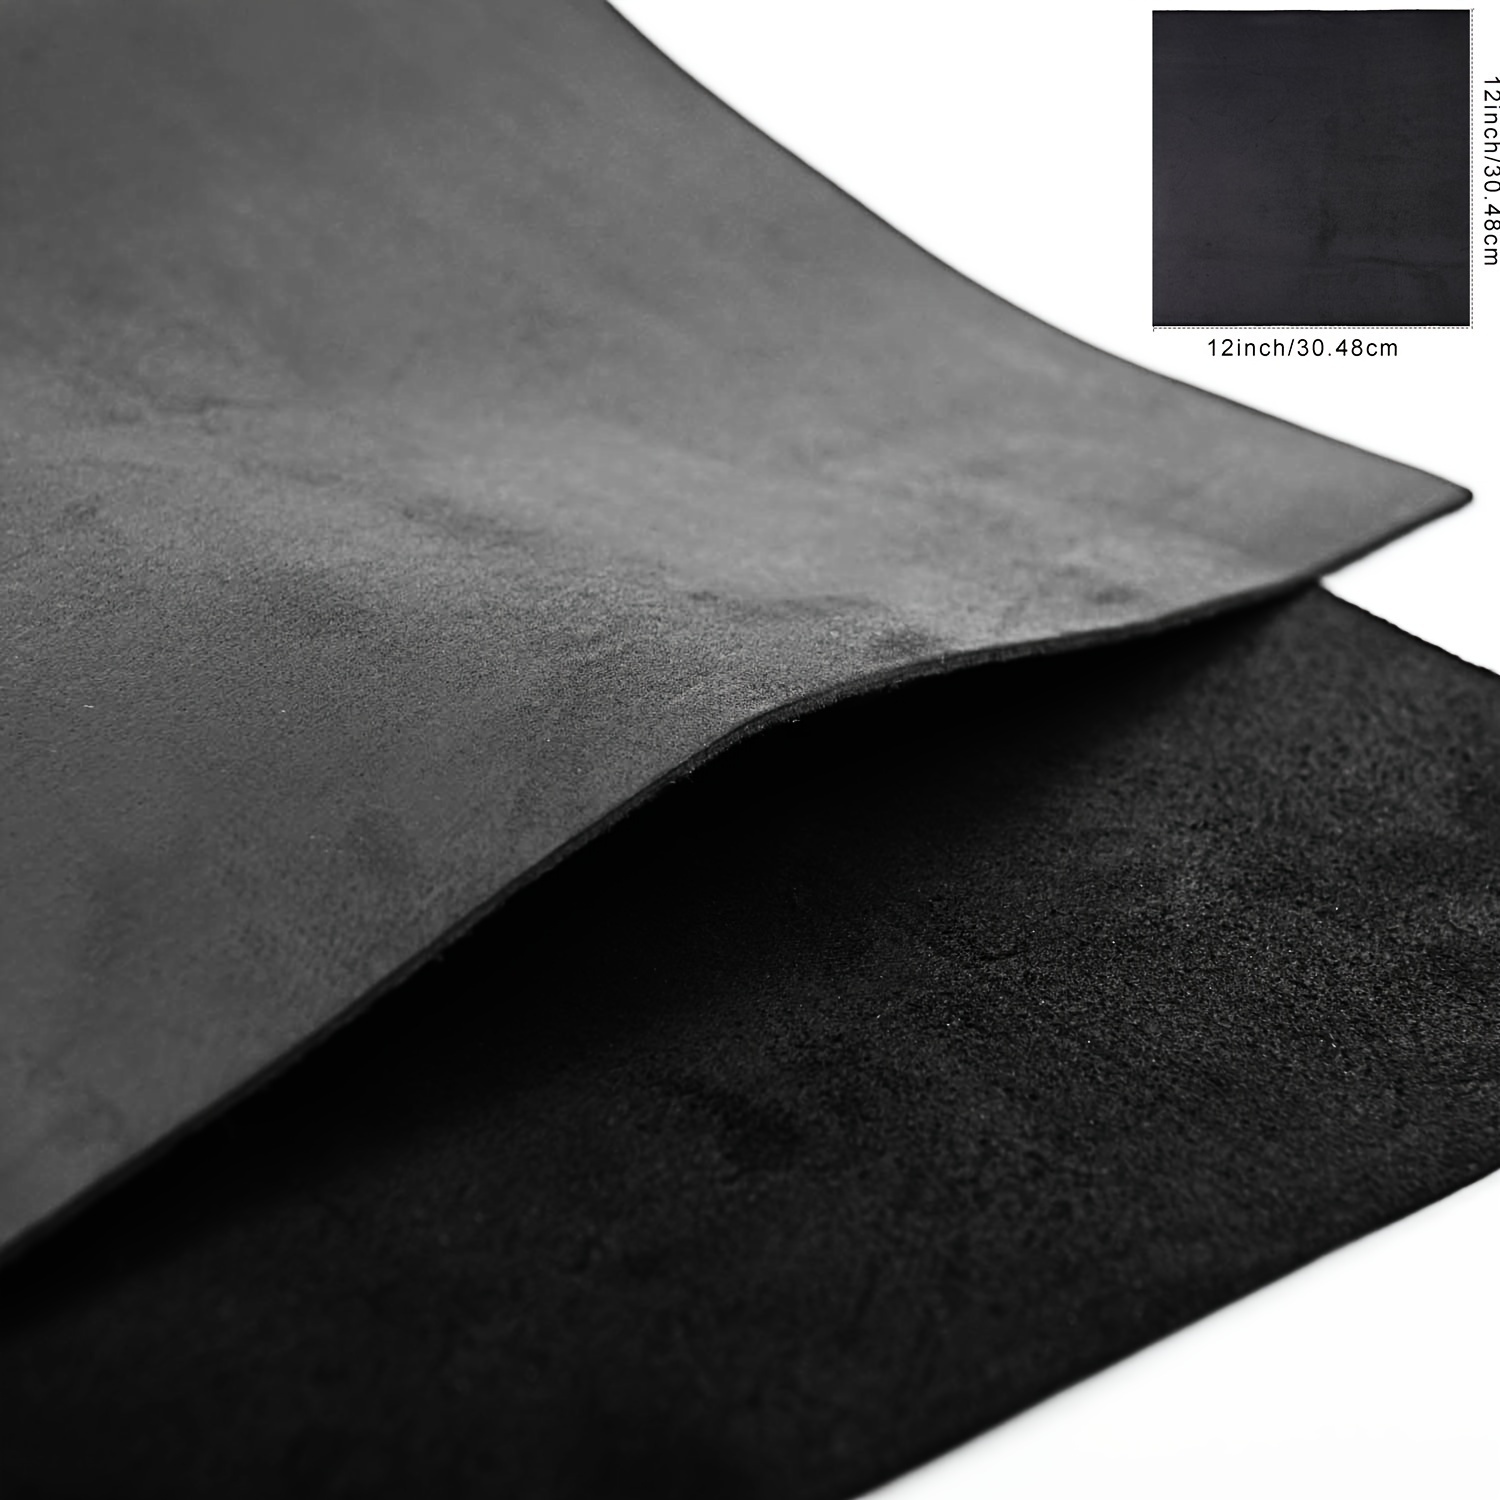 Black Genuine Leather for Crafts: Real Black Lambskin Leather Sheet for  Crafting, Sewing and Personalized Leather Projects (Black, 8x10In/ 20x25cm)